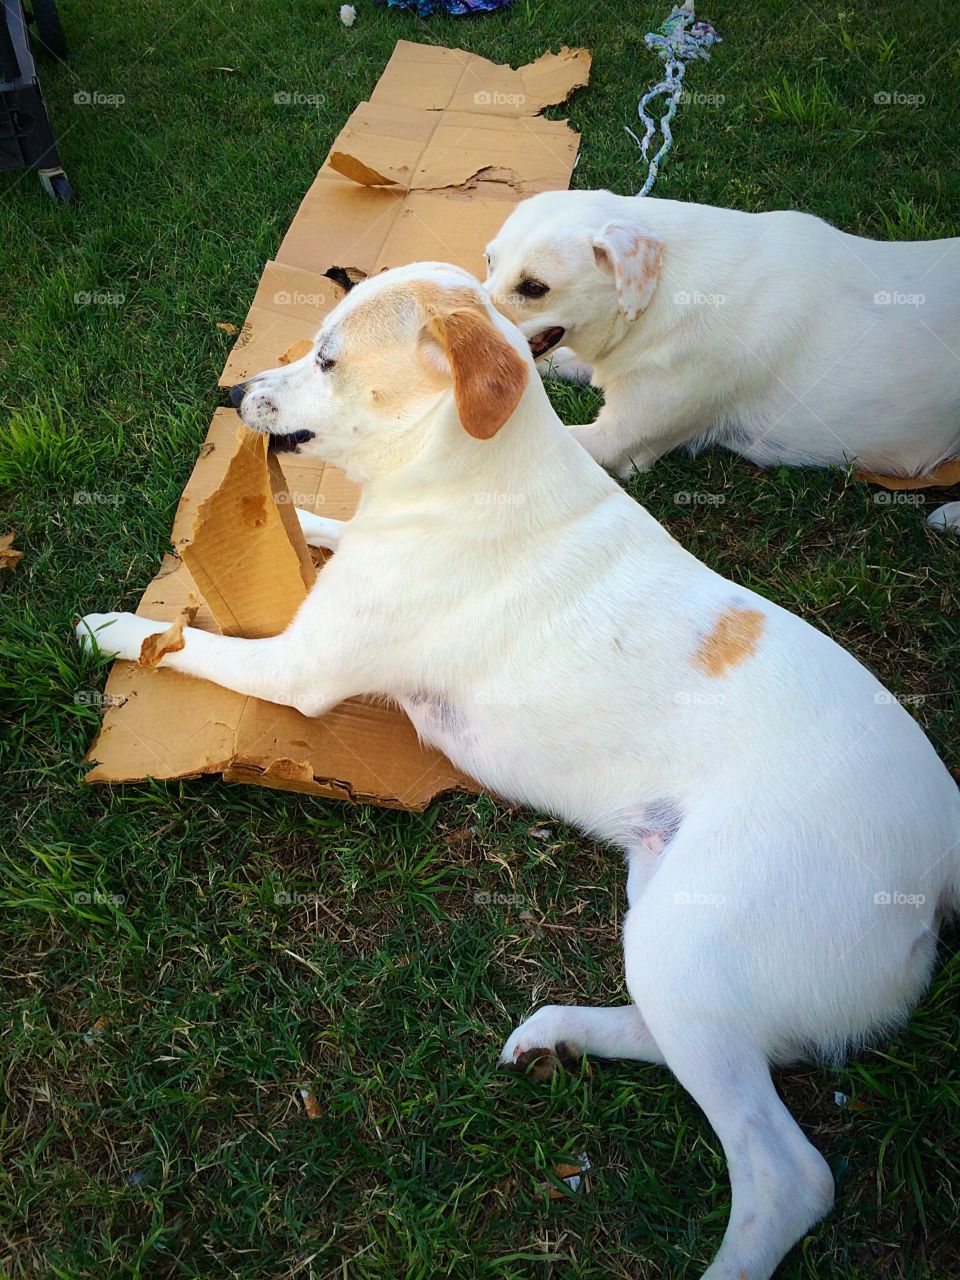 Dogs chewing up cardboard box. 